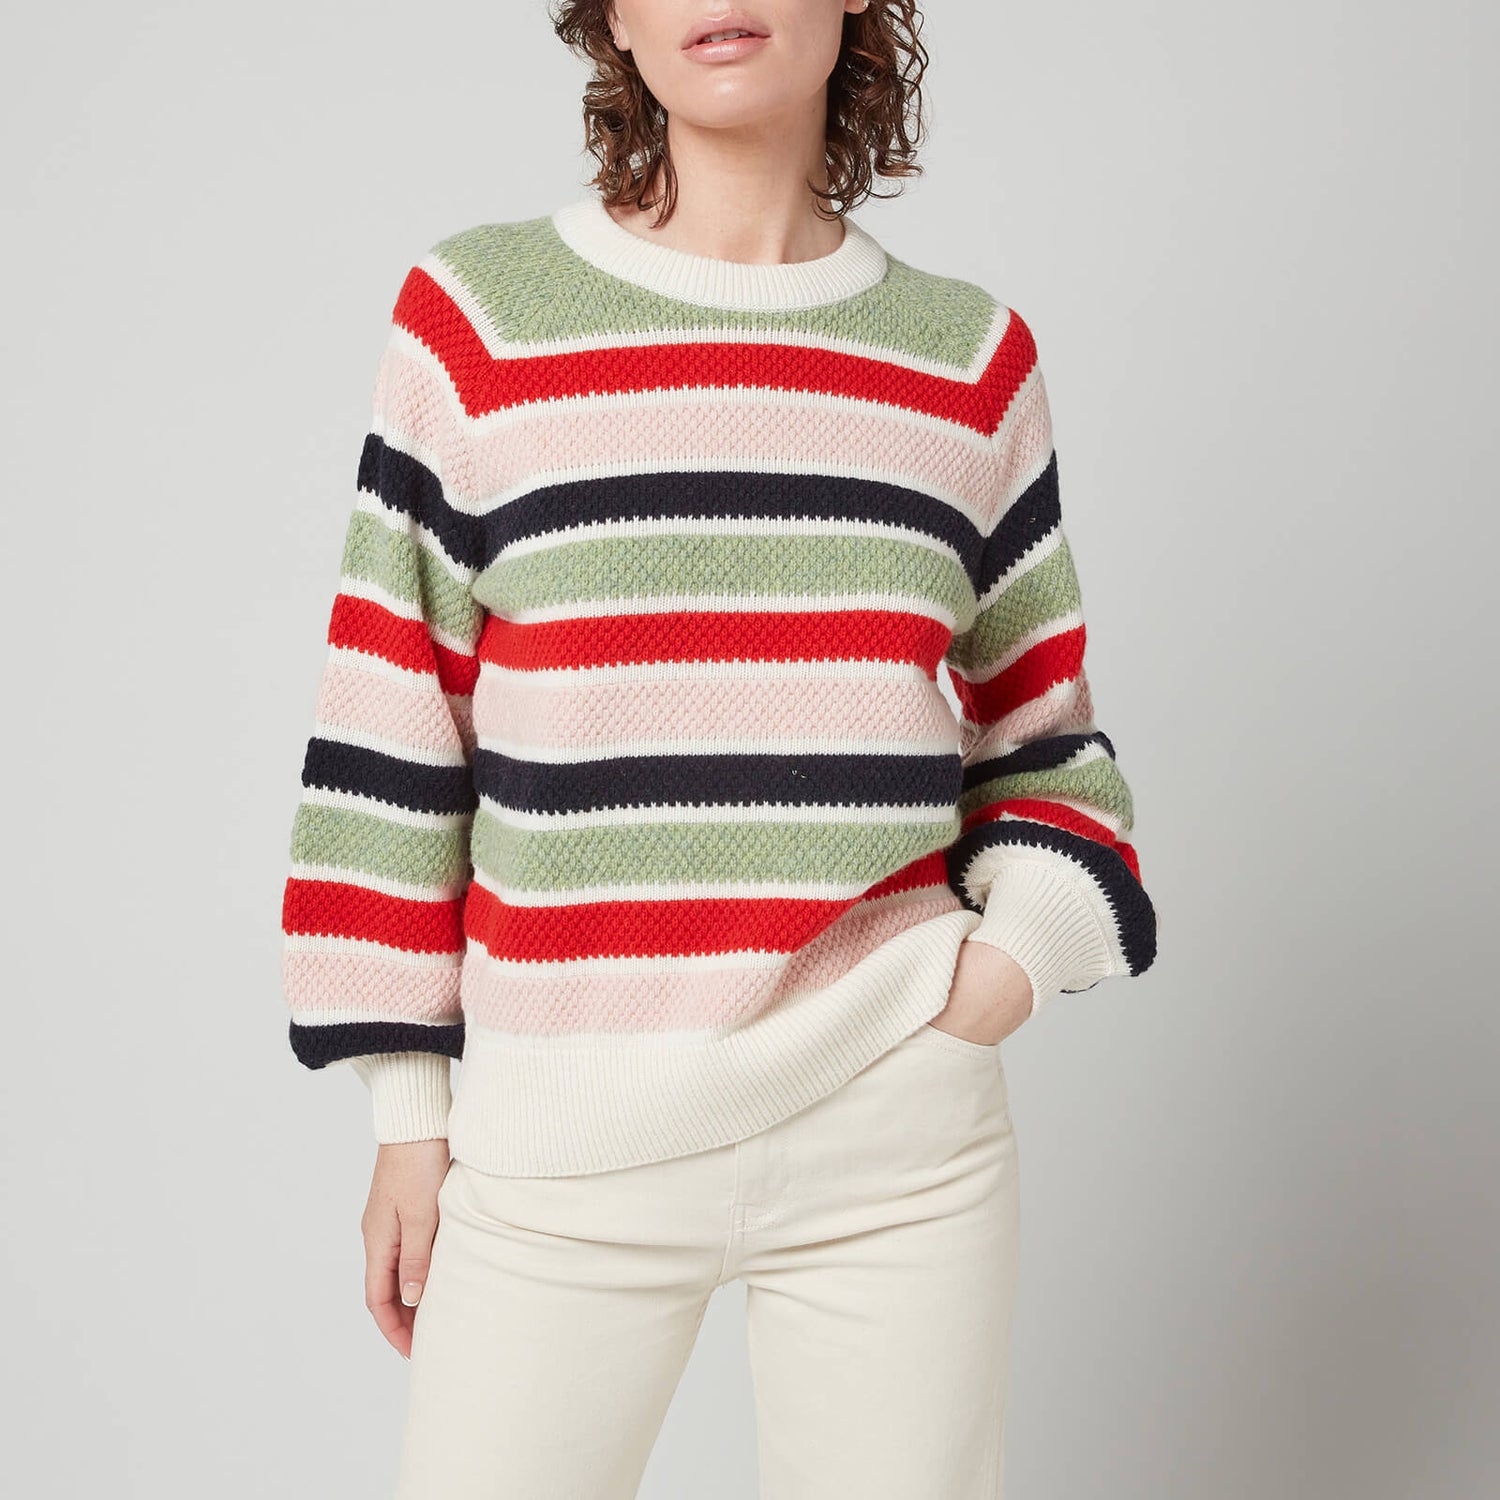 Barbour Women's Collywell Knitted Jumper - Multi